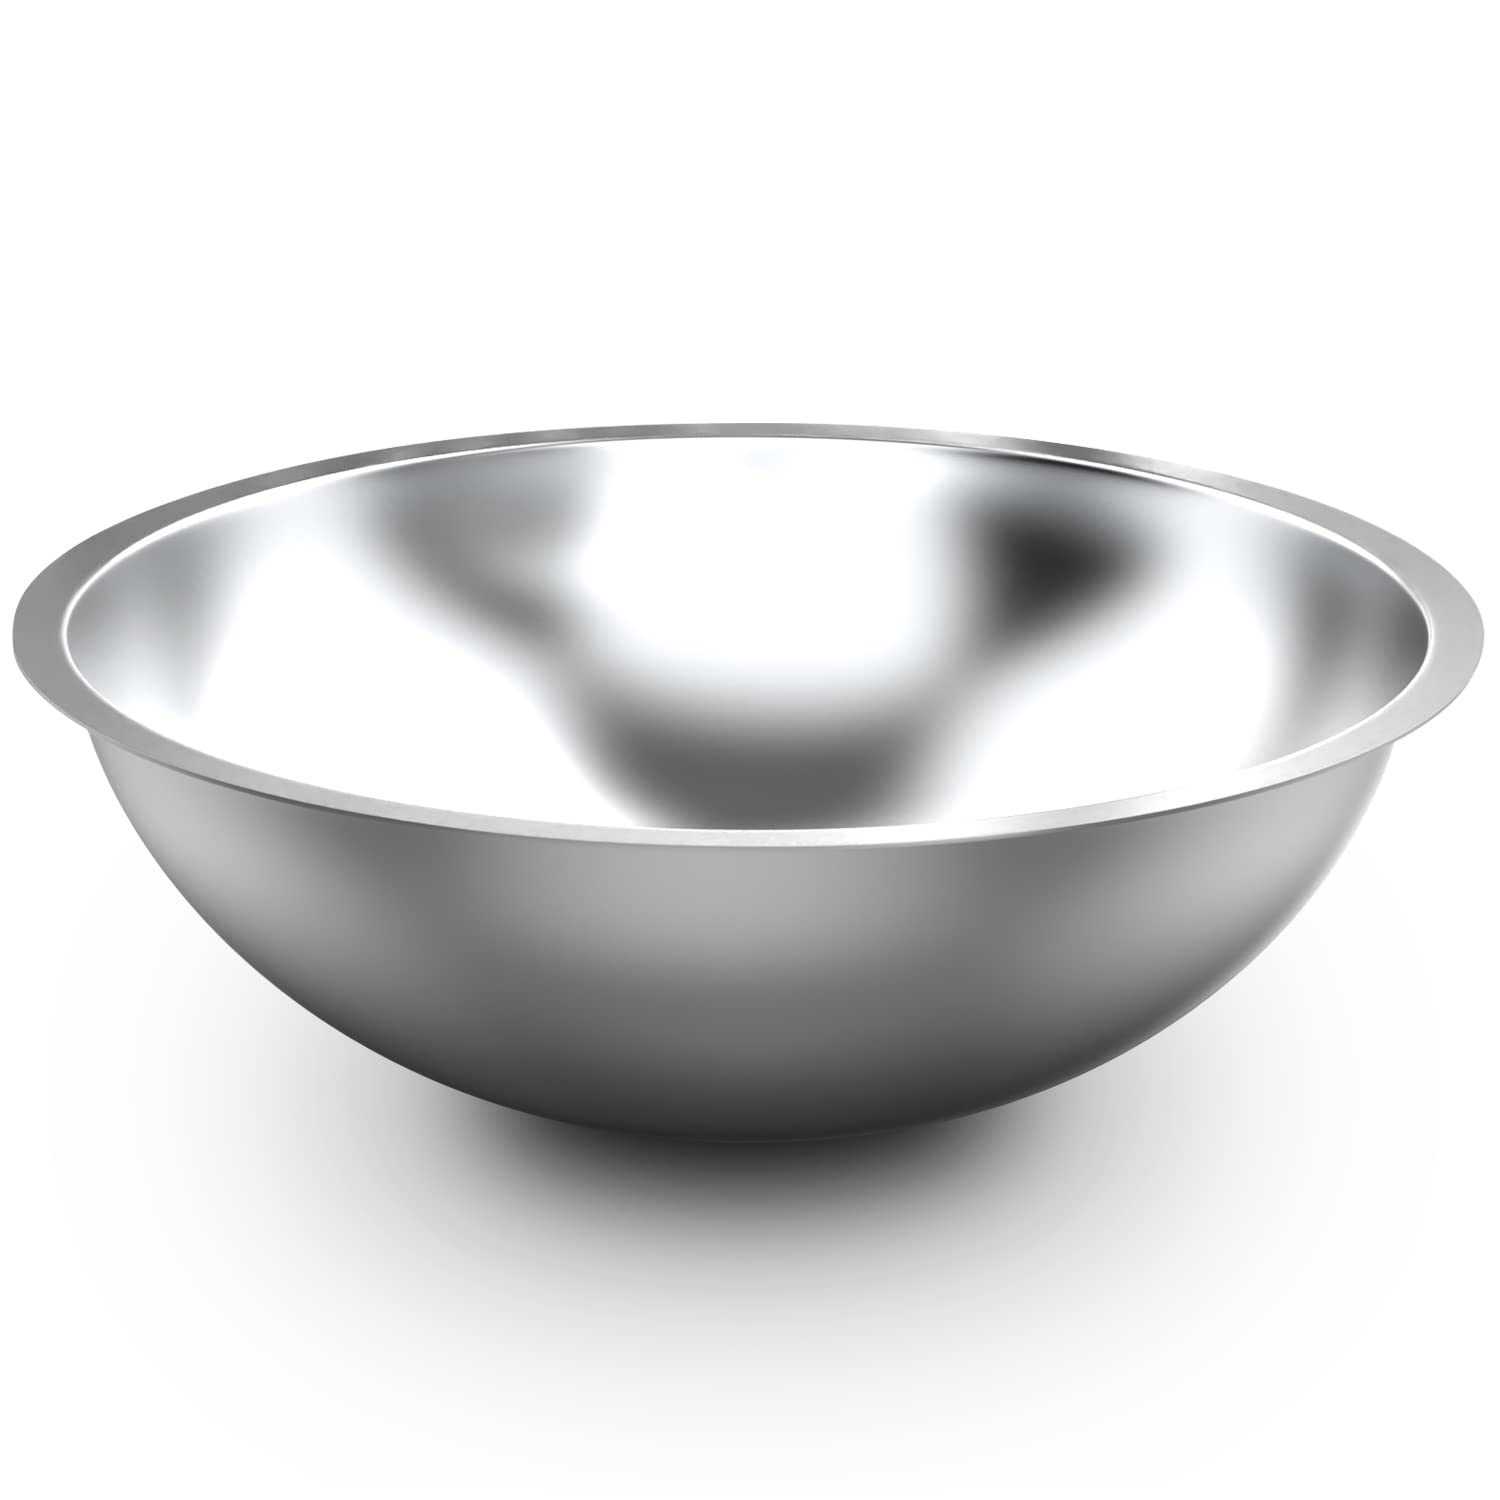 8 Quart Stainless Mixing Bowl, Comes In Each